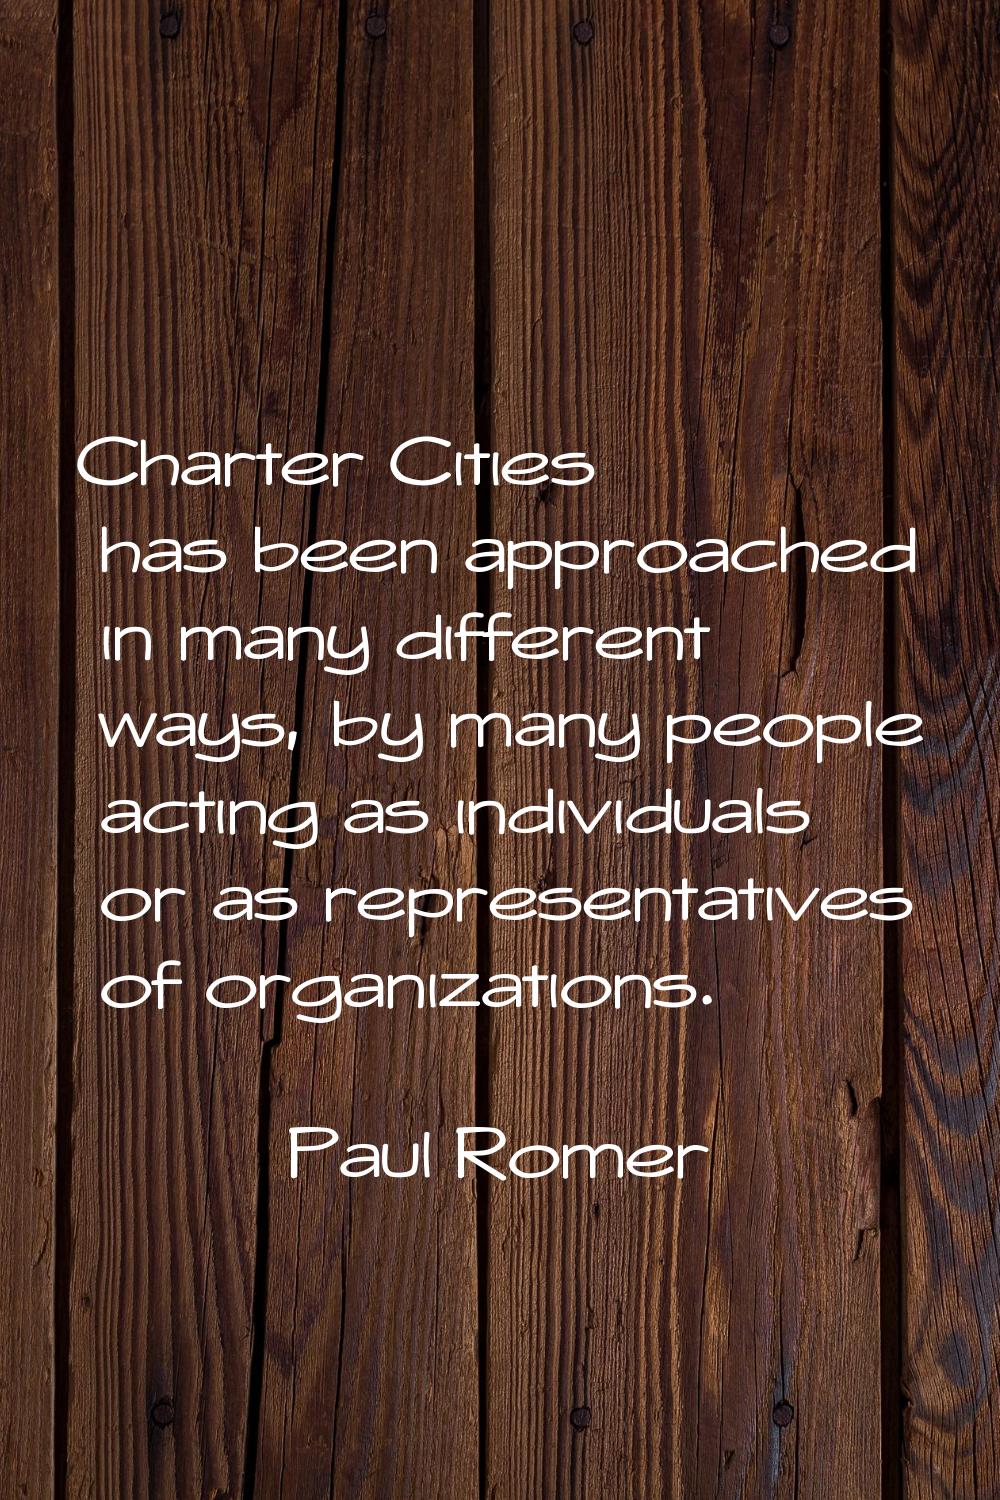 Charter Cities has been approached in many different ways, by many people acting as individuals or 